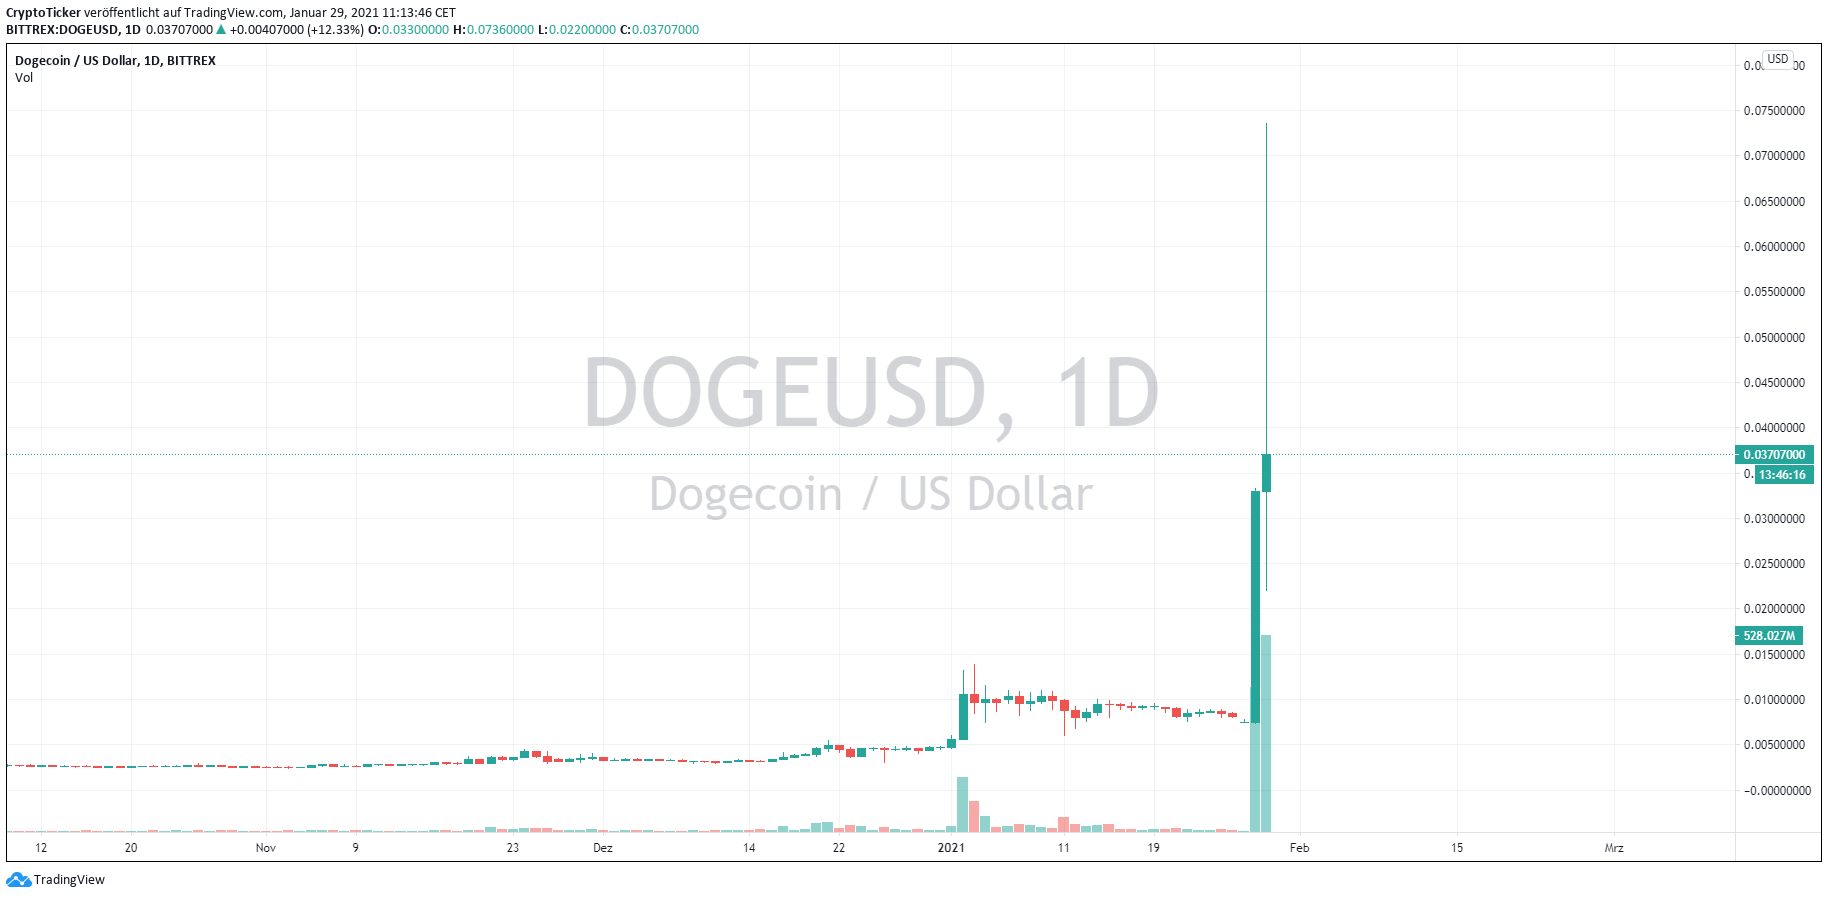 DOGE/USD 1-day chart showing the tremendous price increase post-GameStop Scandal 